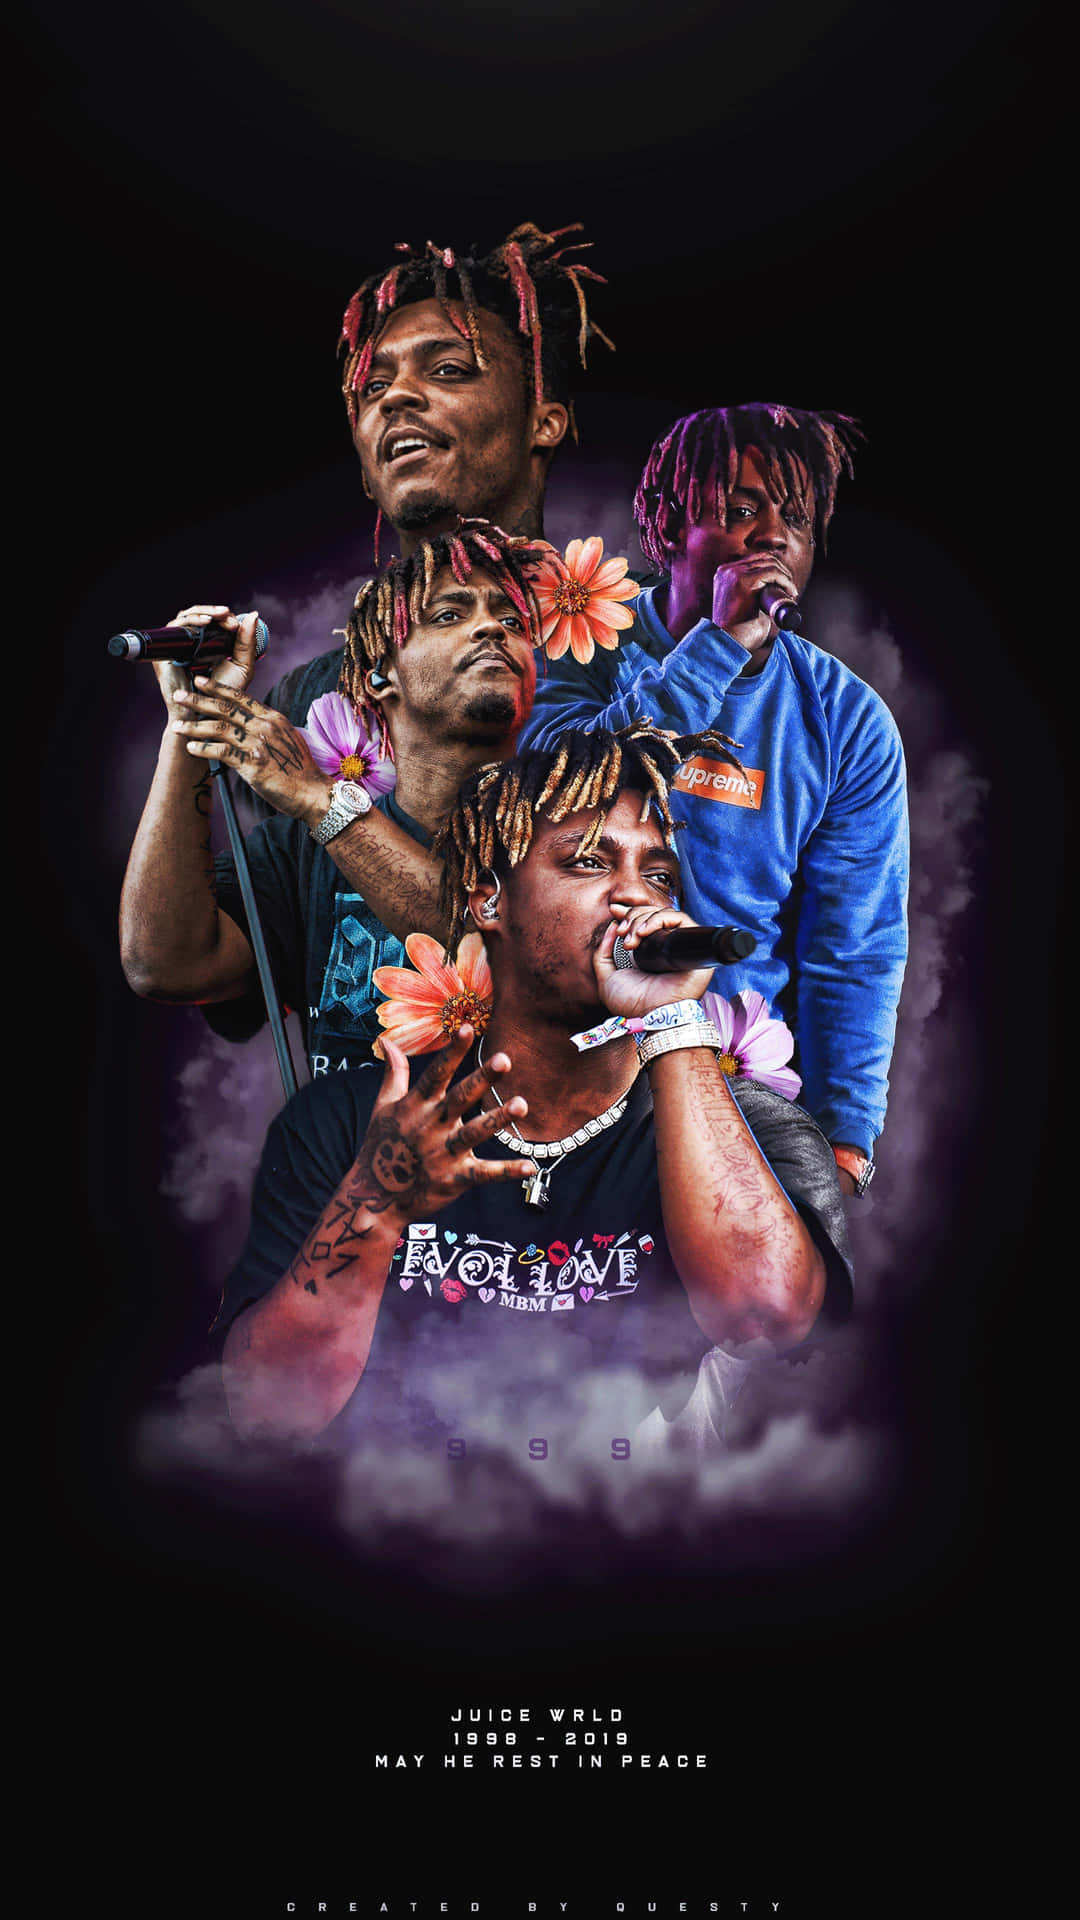 The Late Xxxtentacion And Juice Wrld Performing At Their Joint Tour, Legends Never Die. Background